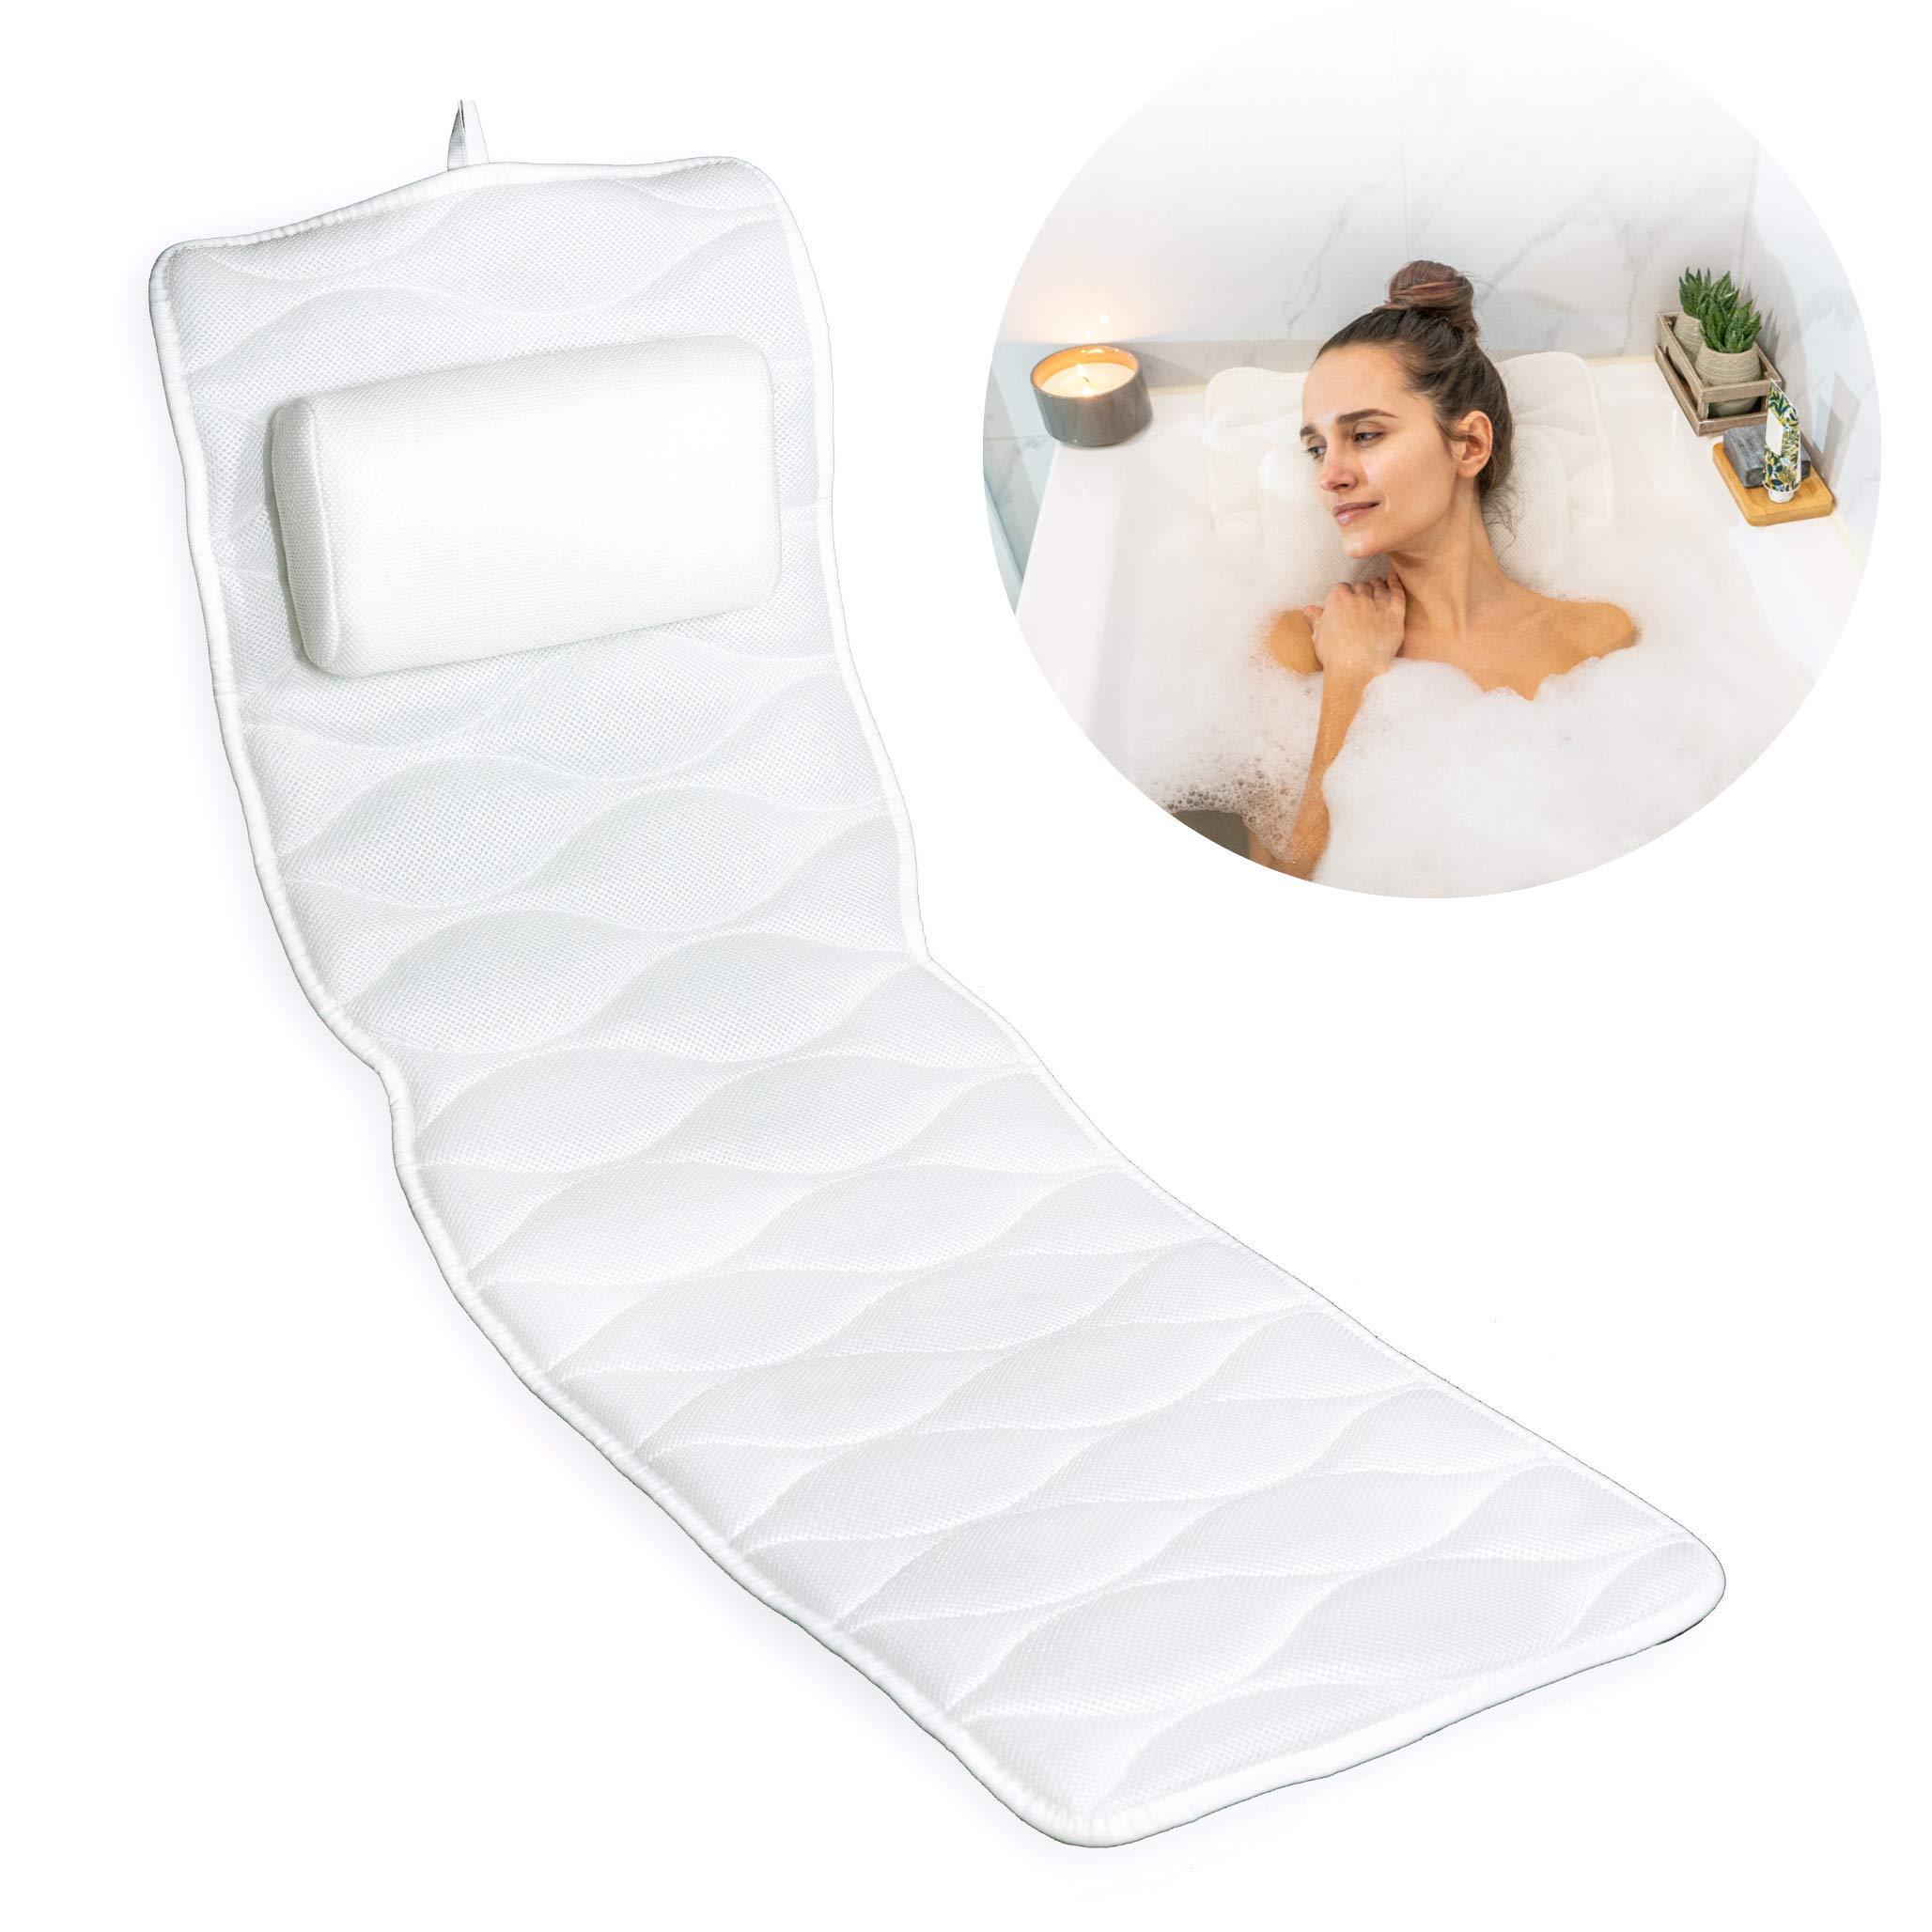 Full Body Bath Pillow for Bathtub: Luxury Bath Pillows for Tub Neck and Back Support - Home Spa Bath Accessories Bathtub Pillow for Soaking Tub. Self Care Gifts for Mom & Birthday Gift - image 1 of 8